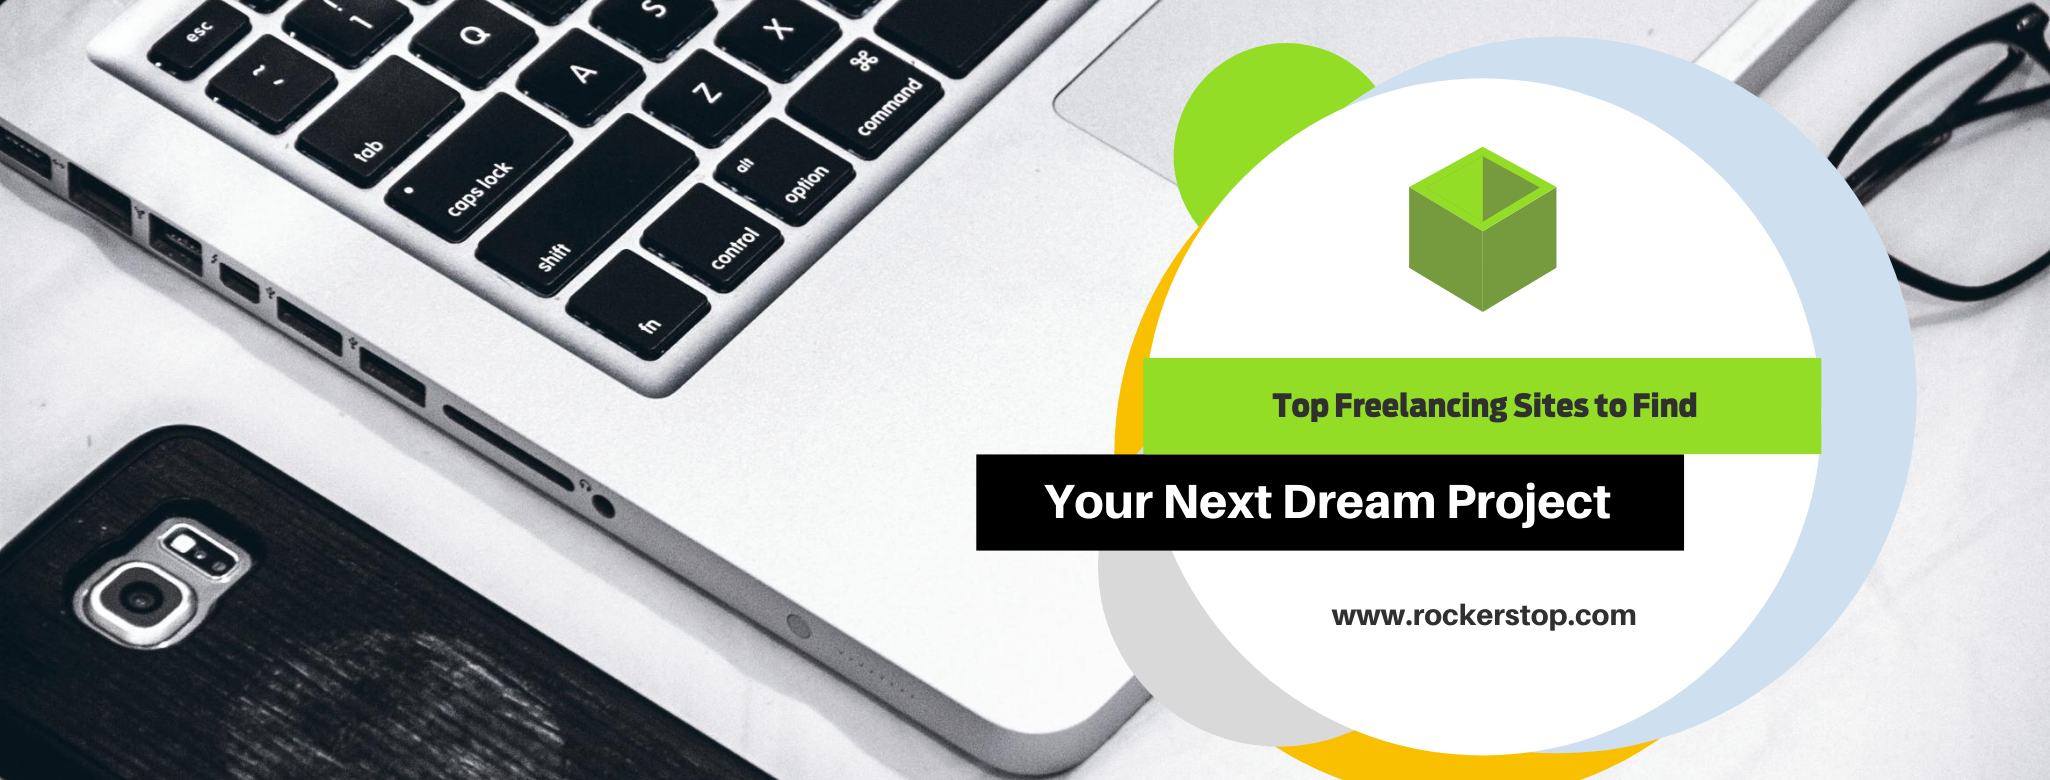 Top-Freelancing-Sites-to-Find-Your-Next-Dream-Project